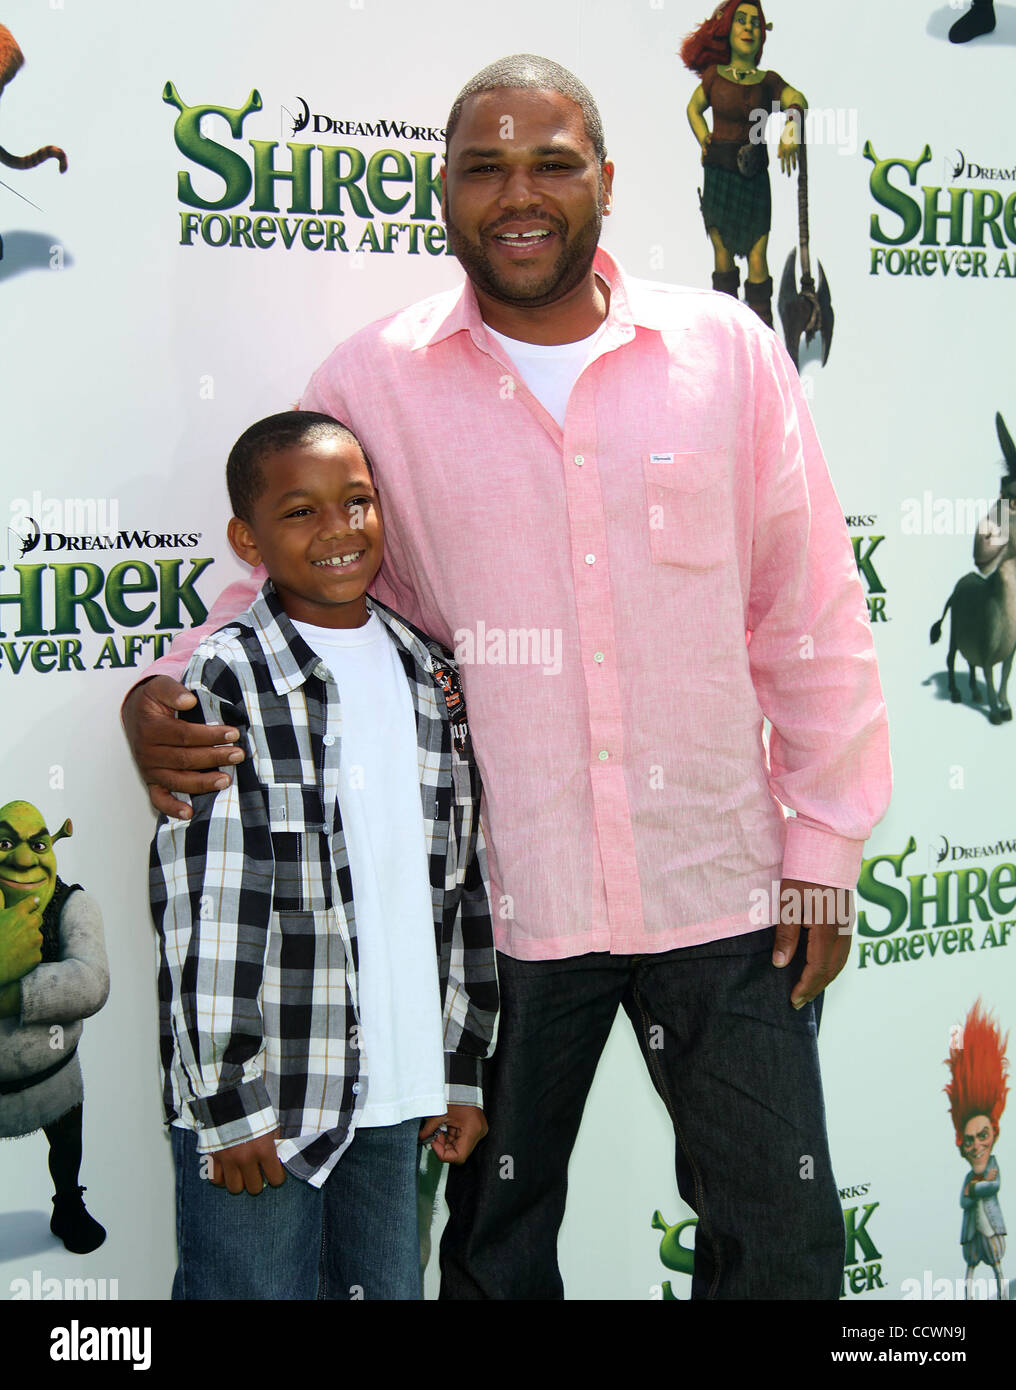 May 16, 2010 - Universal City, California, USA - Actor ANTHONY ANDERSON & son NATHAN arriving to the 'Shrek Forever After' Los Angeles Premiere held at the Gibson Amphitheatre. (Credit Image: © Lisa O'Connor/ZUMA Press) Stock Photo